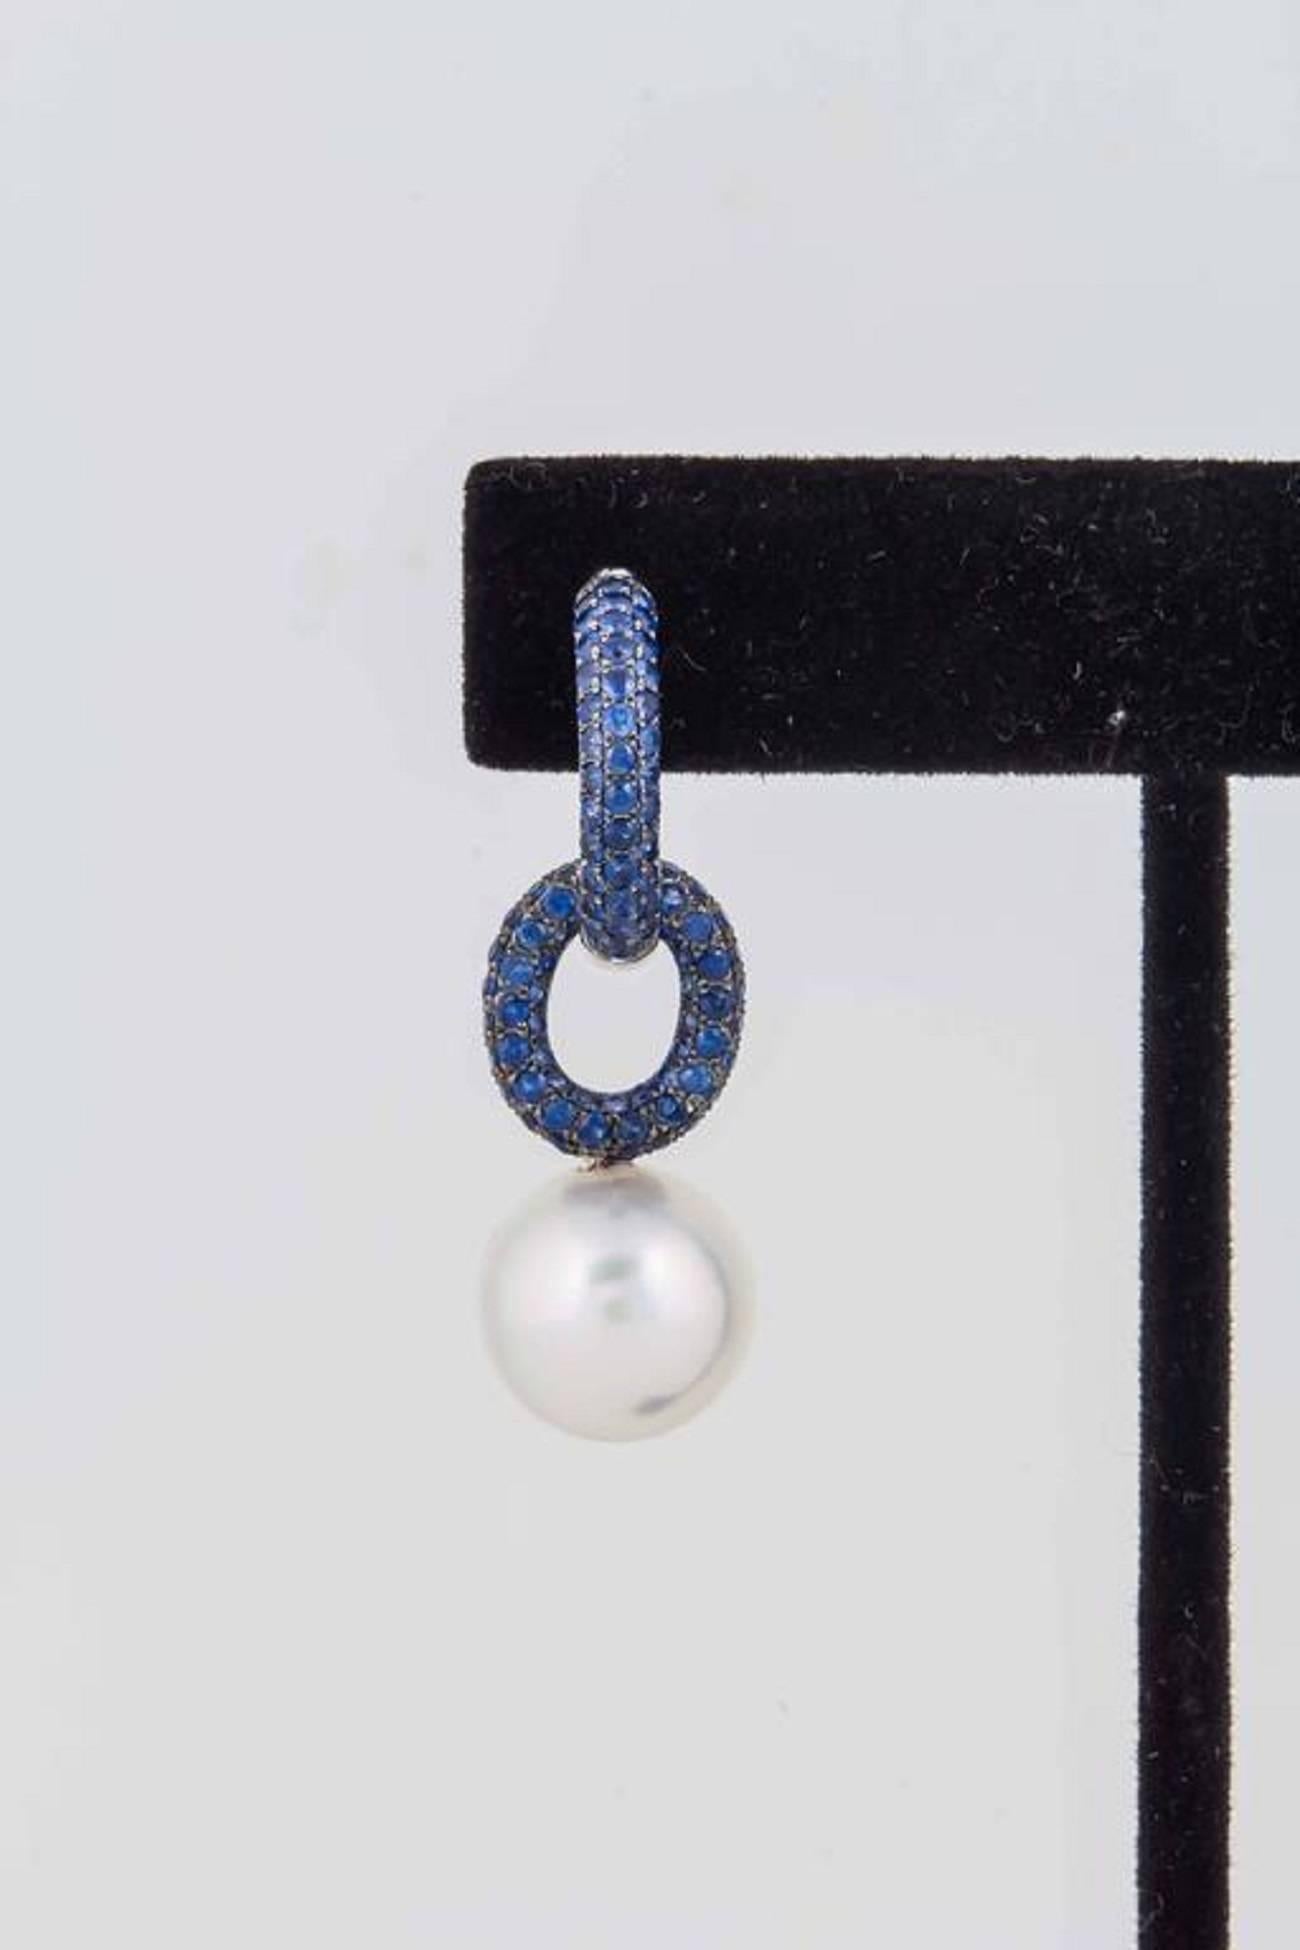 18K White Gold sapphire Hoop Earrings 
3.00 carats Total Sapphire Weight
Weight 6.5G 
South Sea Pearl 12-13mm